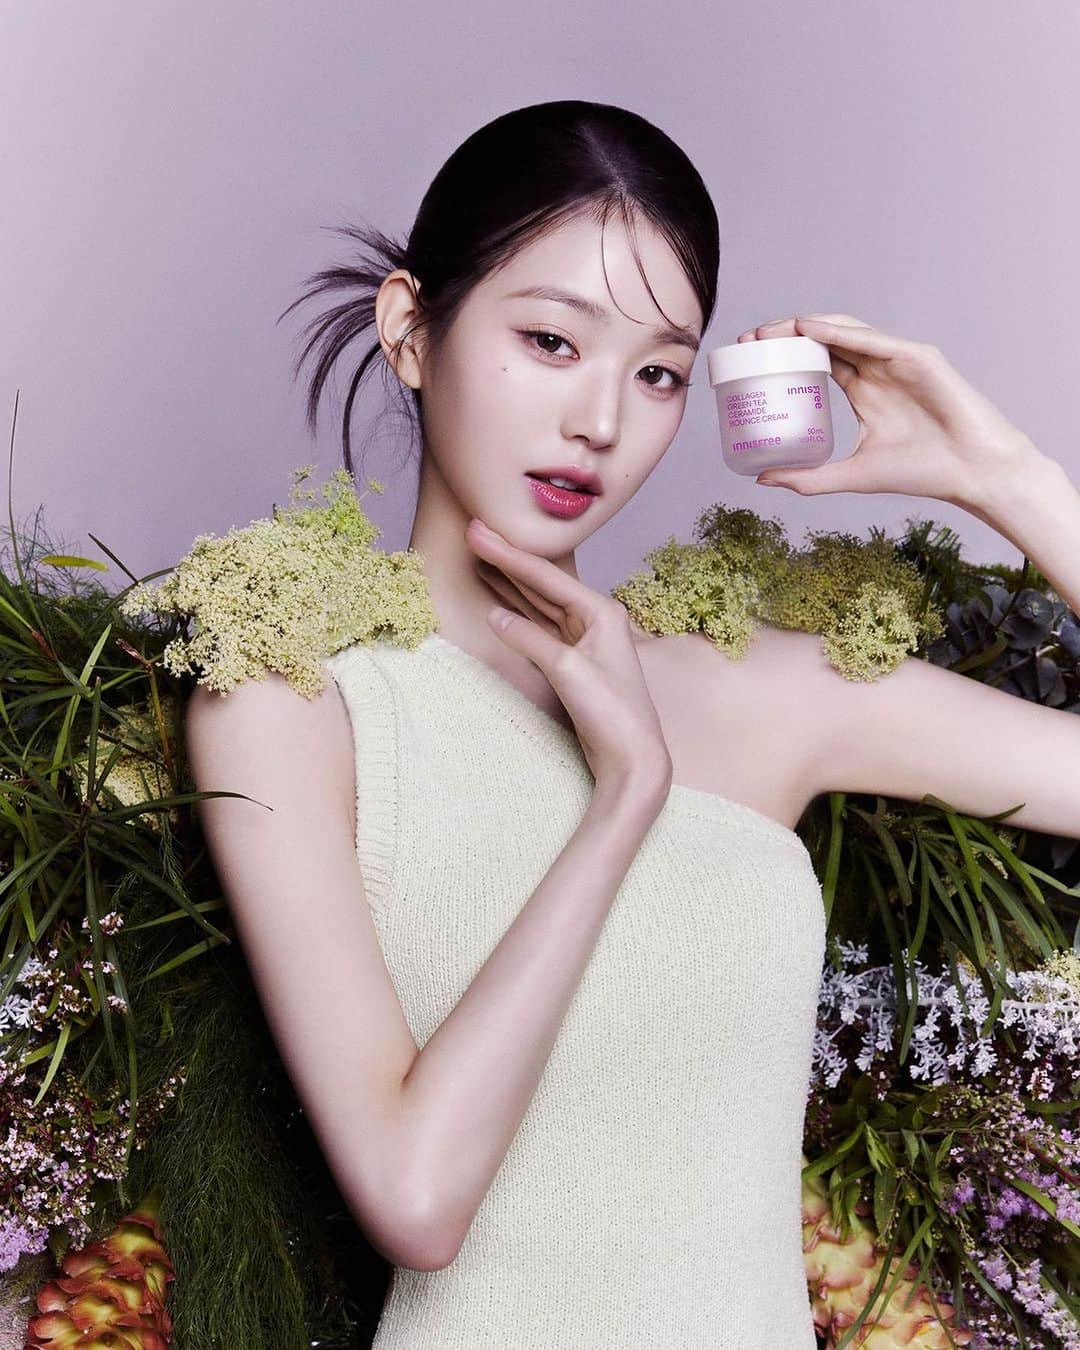 innisfree official (이니스프리) さんのインスタグラム写真 - (innisfree official (이니스프리) Instagram)「#Repost @dazedkorea  THE FLORA OF THE NEW ISLE #협찬  @for_everyoung10 @innisfreeofficial  무한한 대자연 속 장원영의 판타지 놀이터. 중력을 거스르는 순간 만끽하는 자유 그리고 이니스프리.   Jang Wonyoung's fantasy playground in the boundless nature. savouring the moments defying gravity, and Innisfree.  Editor Lee Namhoon, Marco Kim  Photography Jang Duckhwa 3D Art Studio L’extreme @studio.lextreme (Park Juwoo) Fashion Park Jiyoung  Hair Harin at Oui Oui Atelier Makeup Yoon Sojeong at Oui Oui Atelier  #이니스프리 #INNISFREE #이니스프리콜라겐크림 #콜라겐크림 #콜라겐탄력장벽크림 #장원영 #JANGWONYOUNG #아이브_장원영  #IVE_JANGWONYOUNG」11月6日 20時33分 - innisfreeofficial